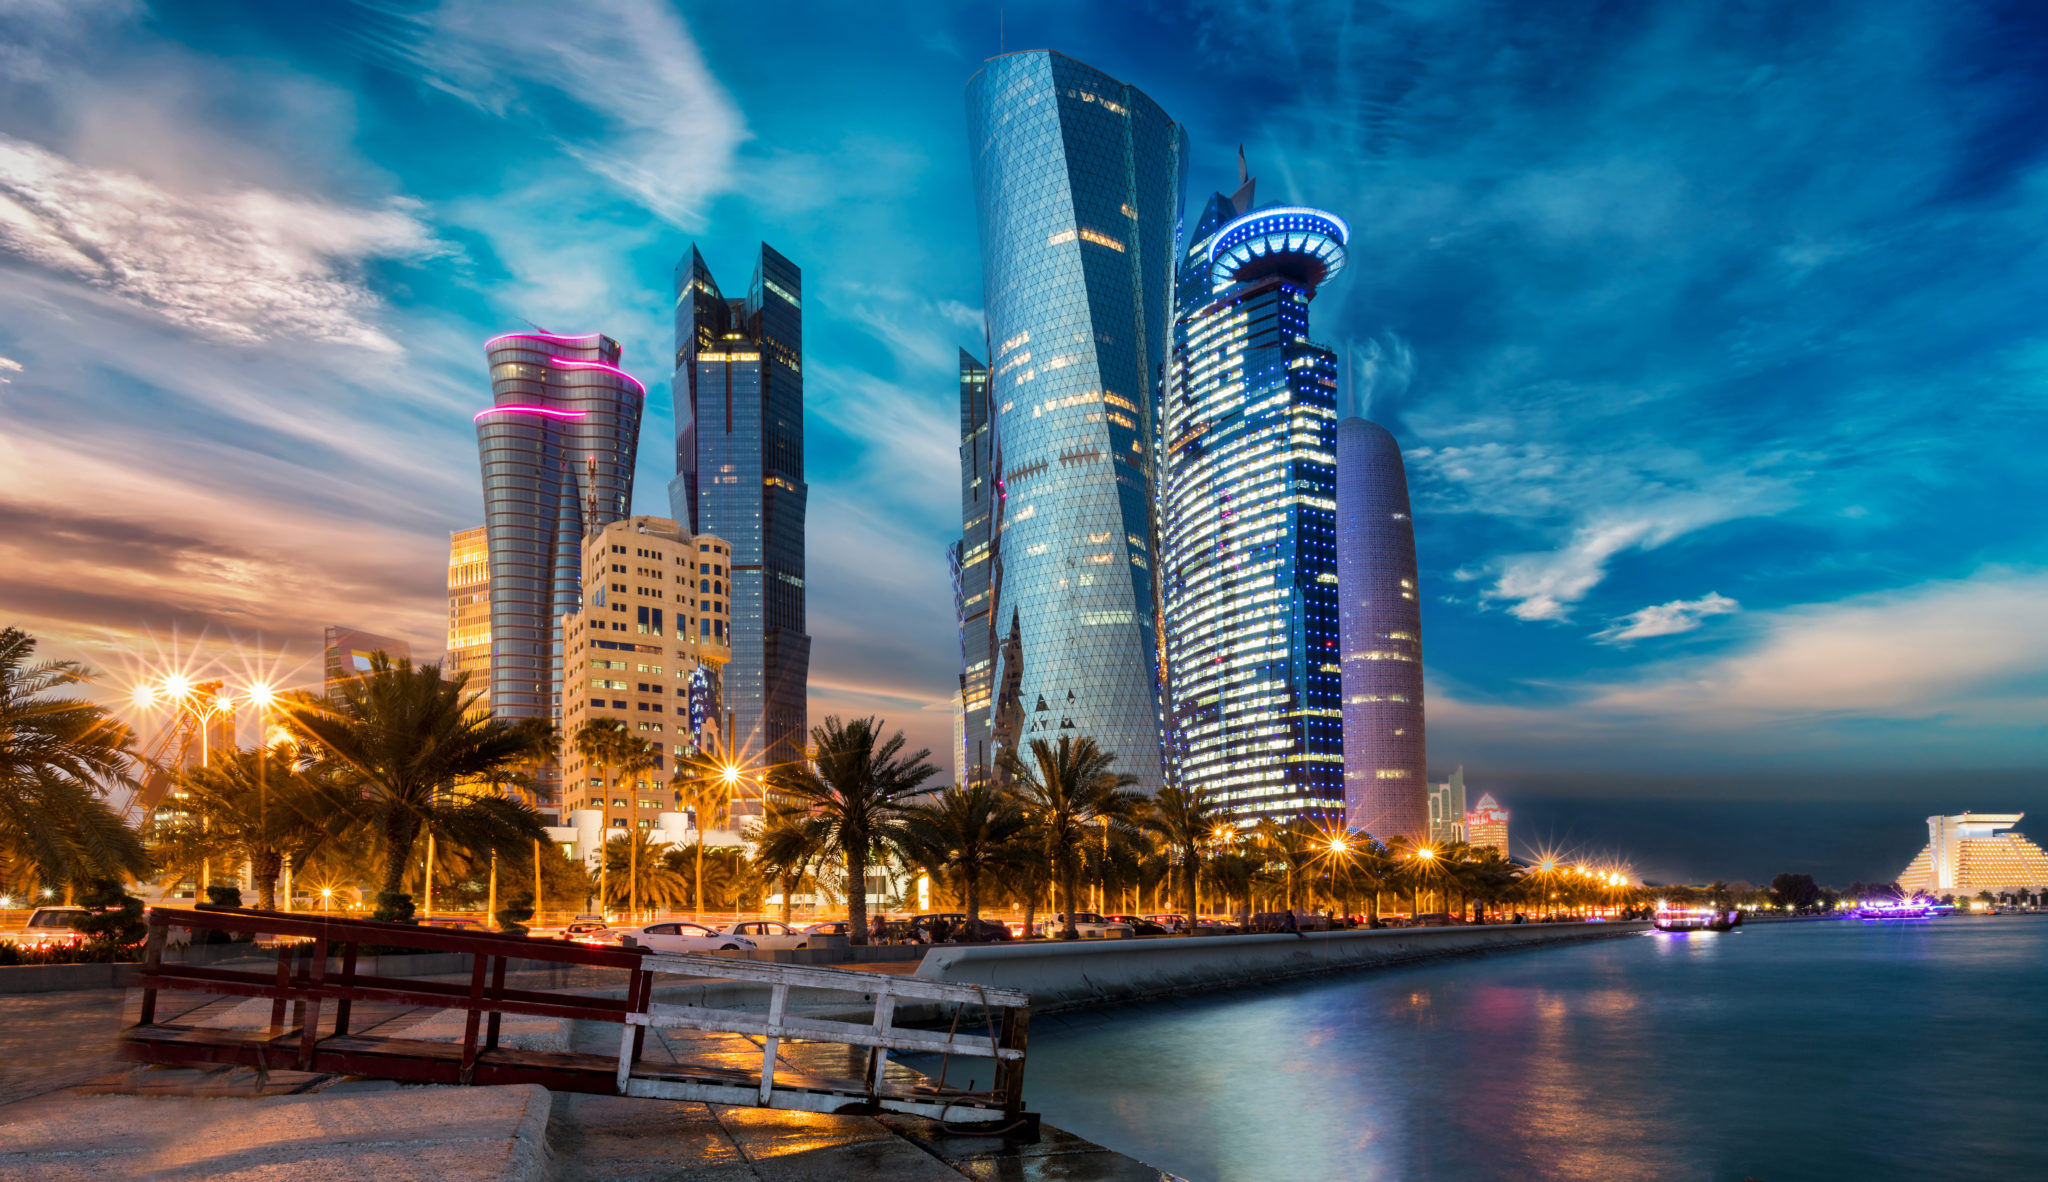 Qatar is the richest country in the world